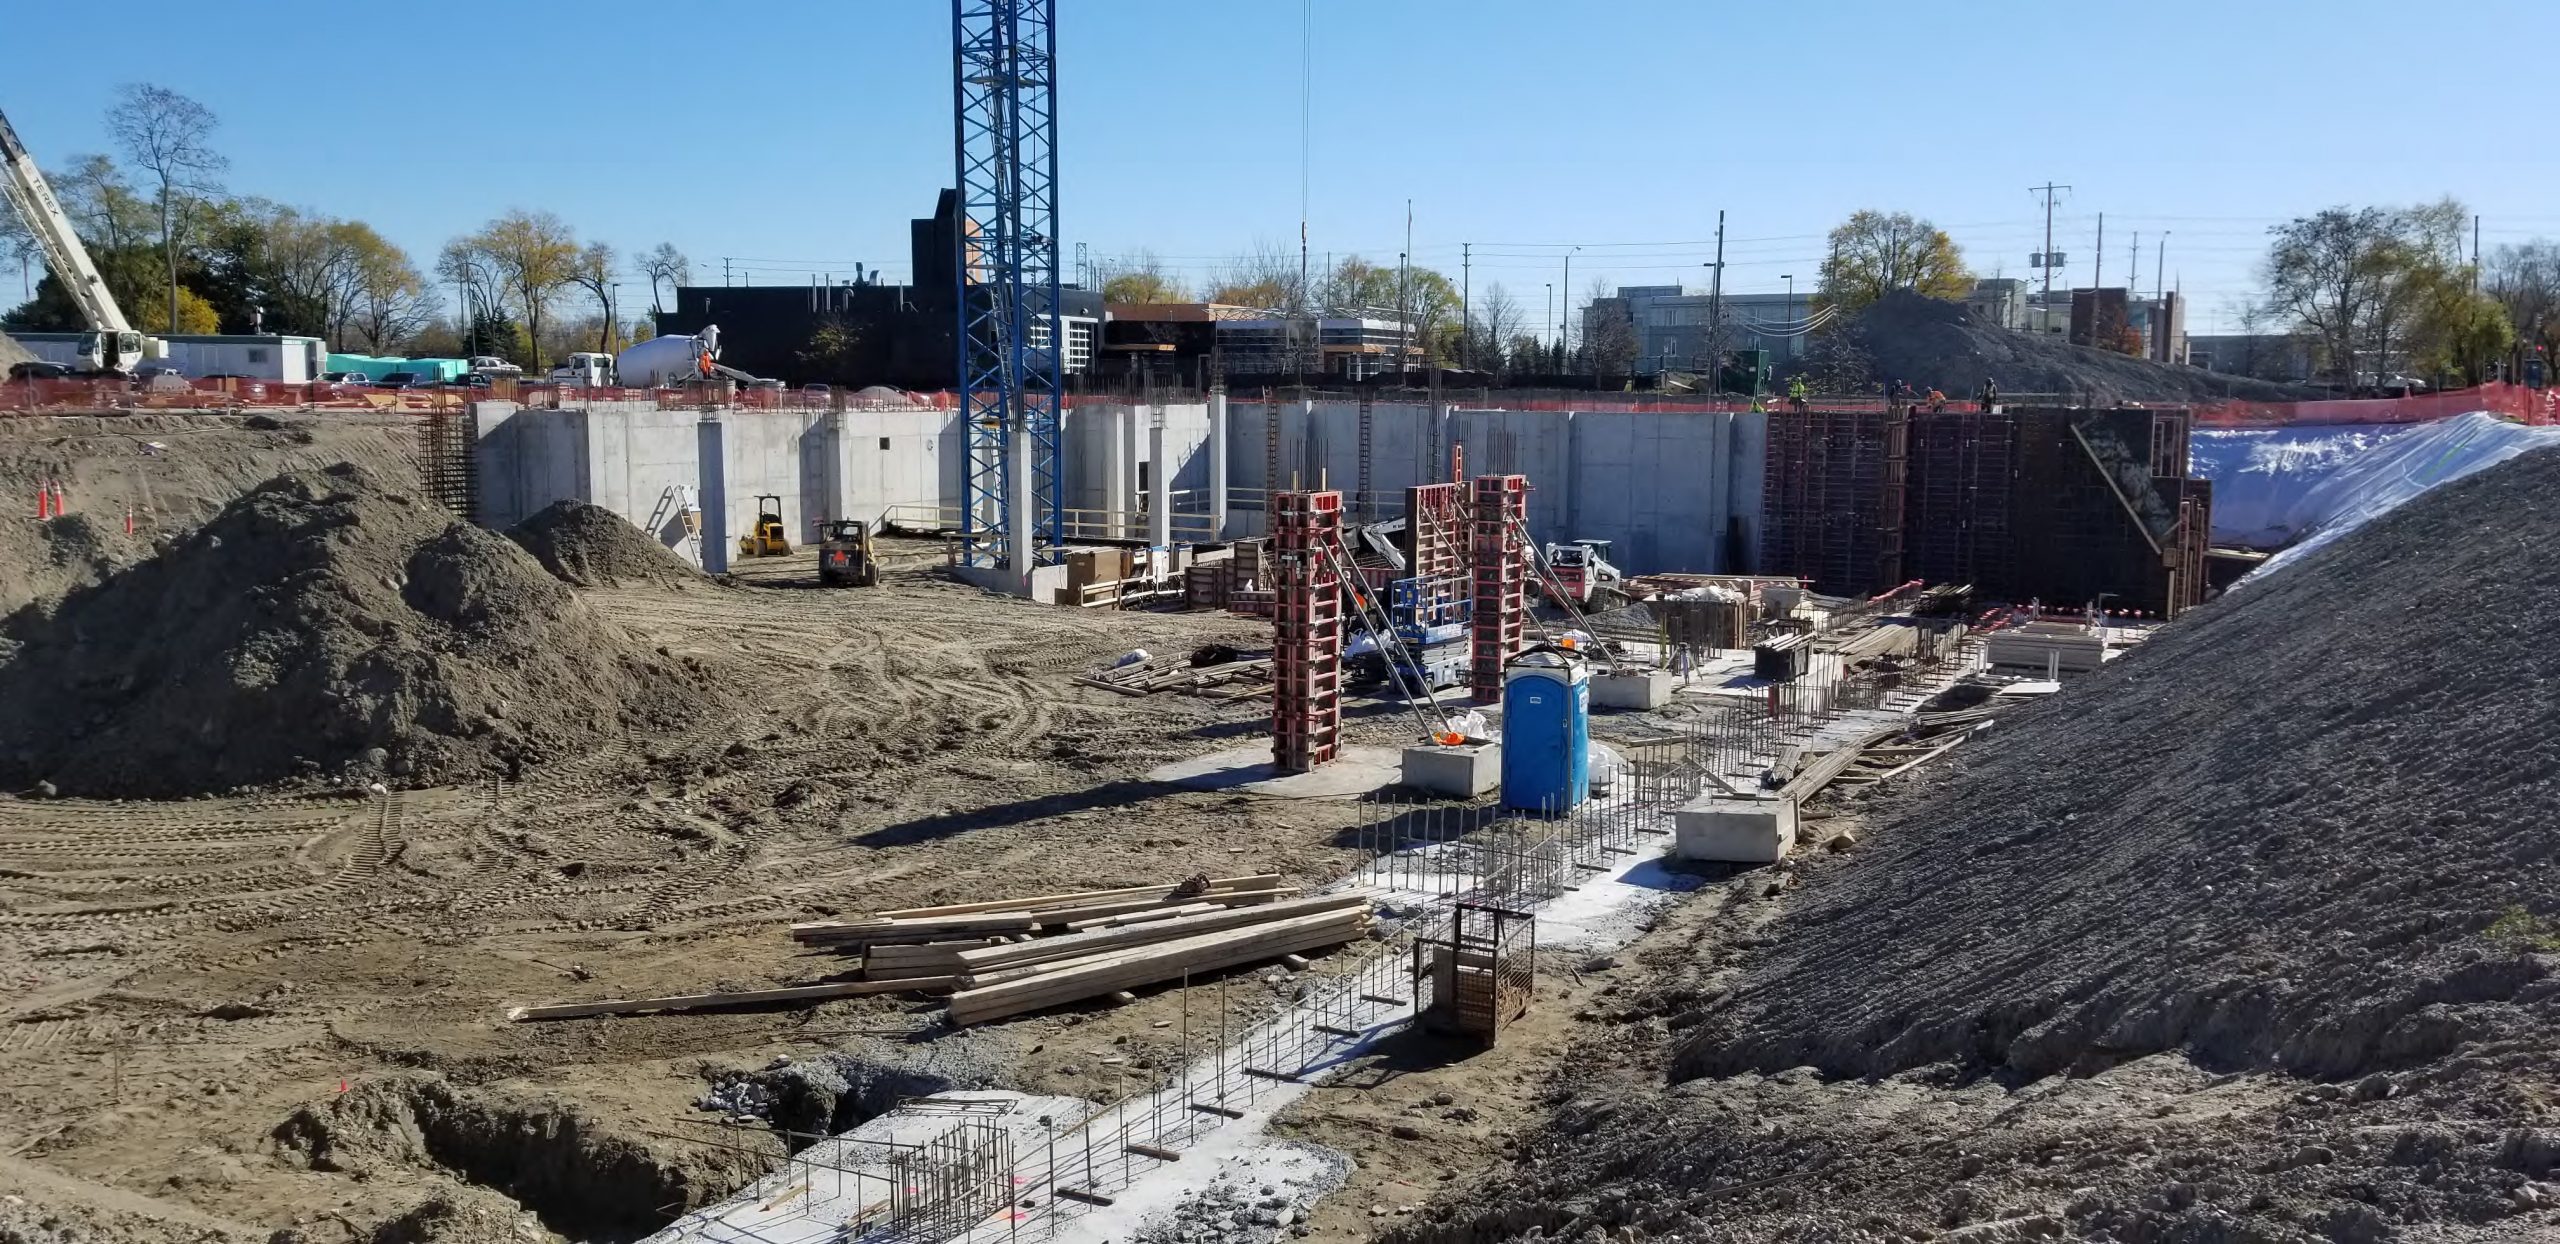 A photograph of the construction site at North East Scarborough Community Centre, which shows below-ground excavation work, including a partially complete concrete foundation wall, crane, and construction material. 